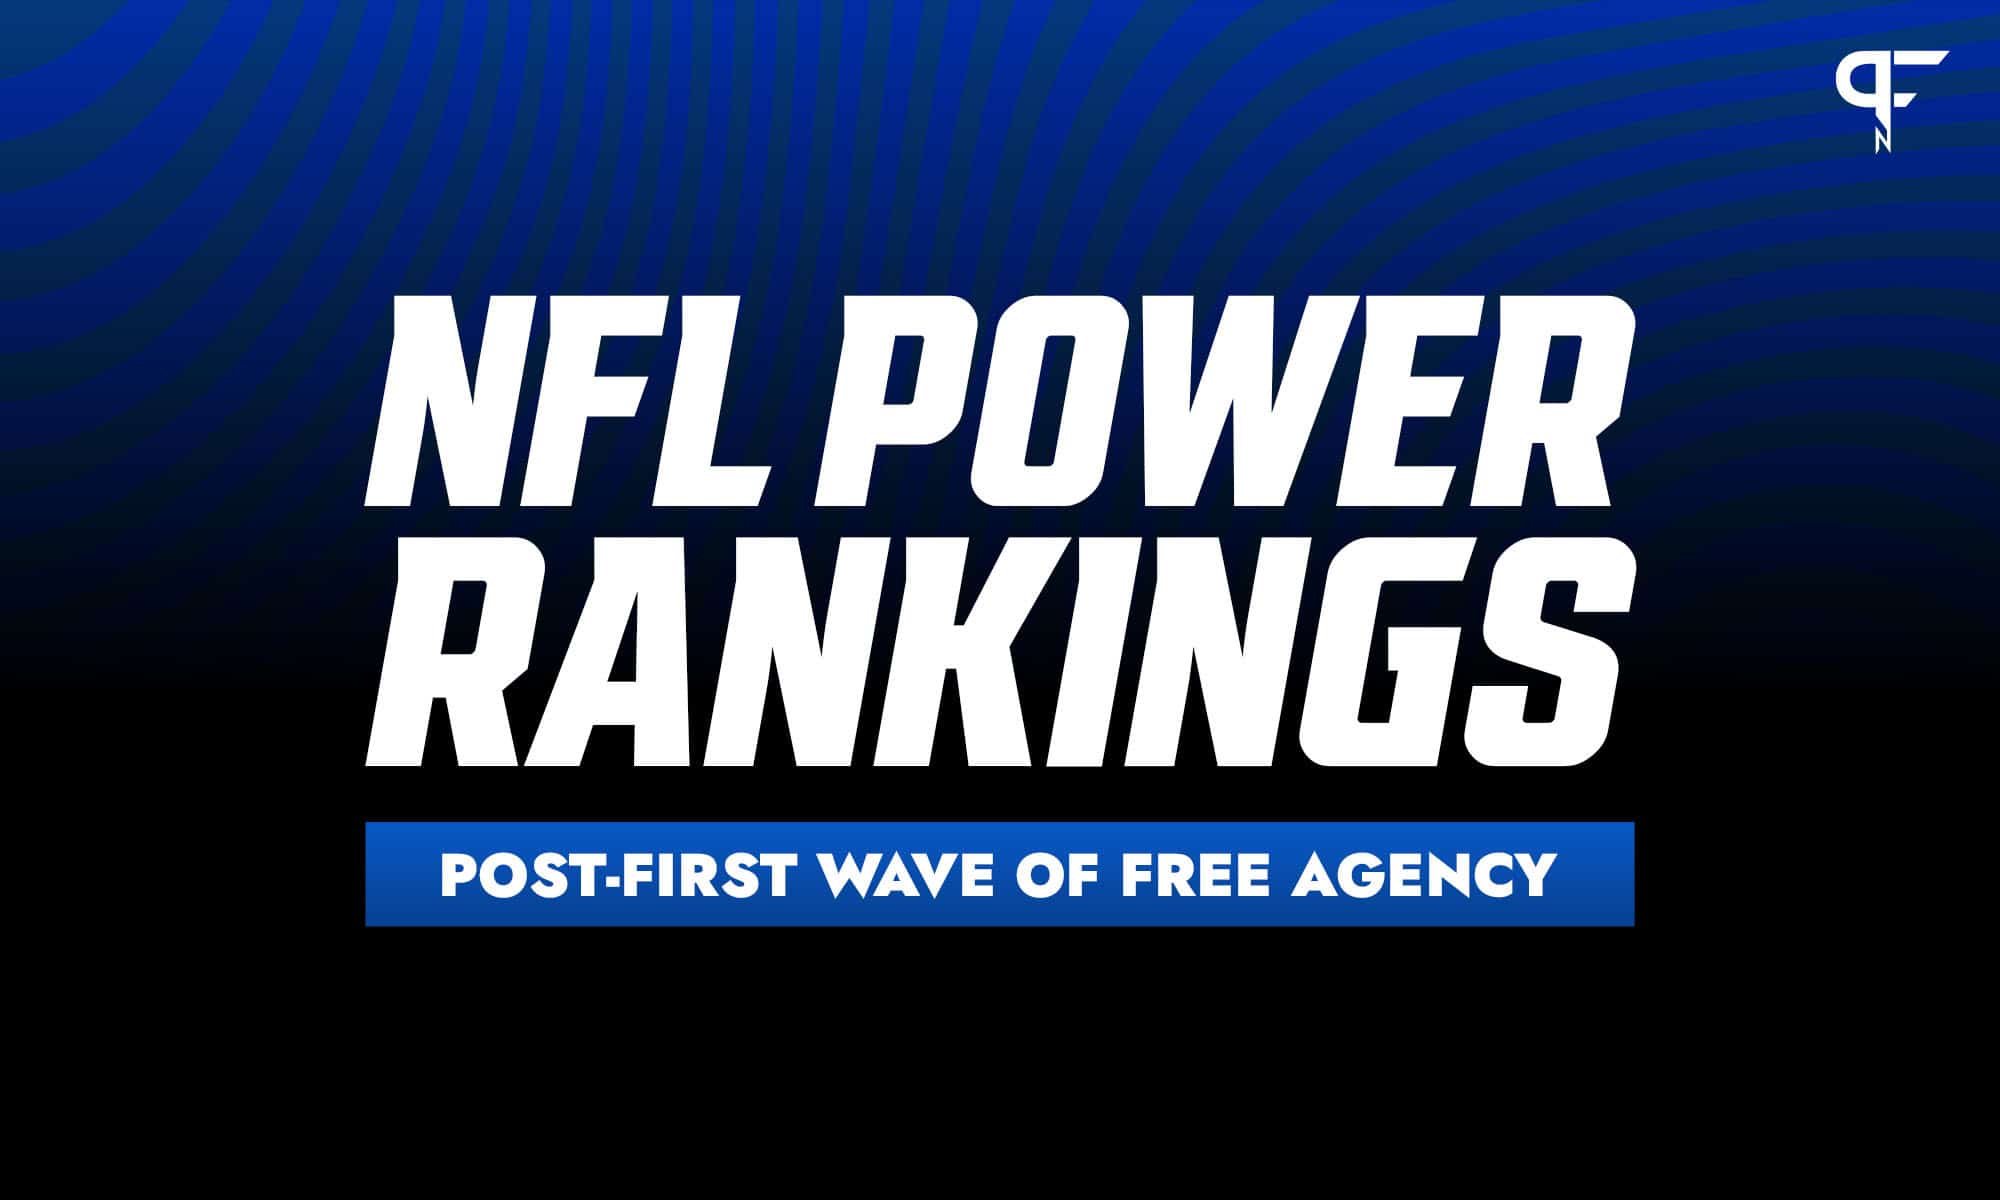 NFL Power Rankings: Jets, Dolphins climb after free agency frenzy